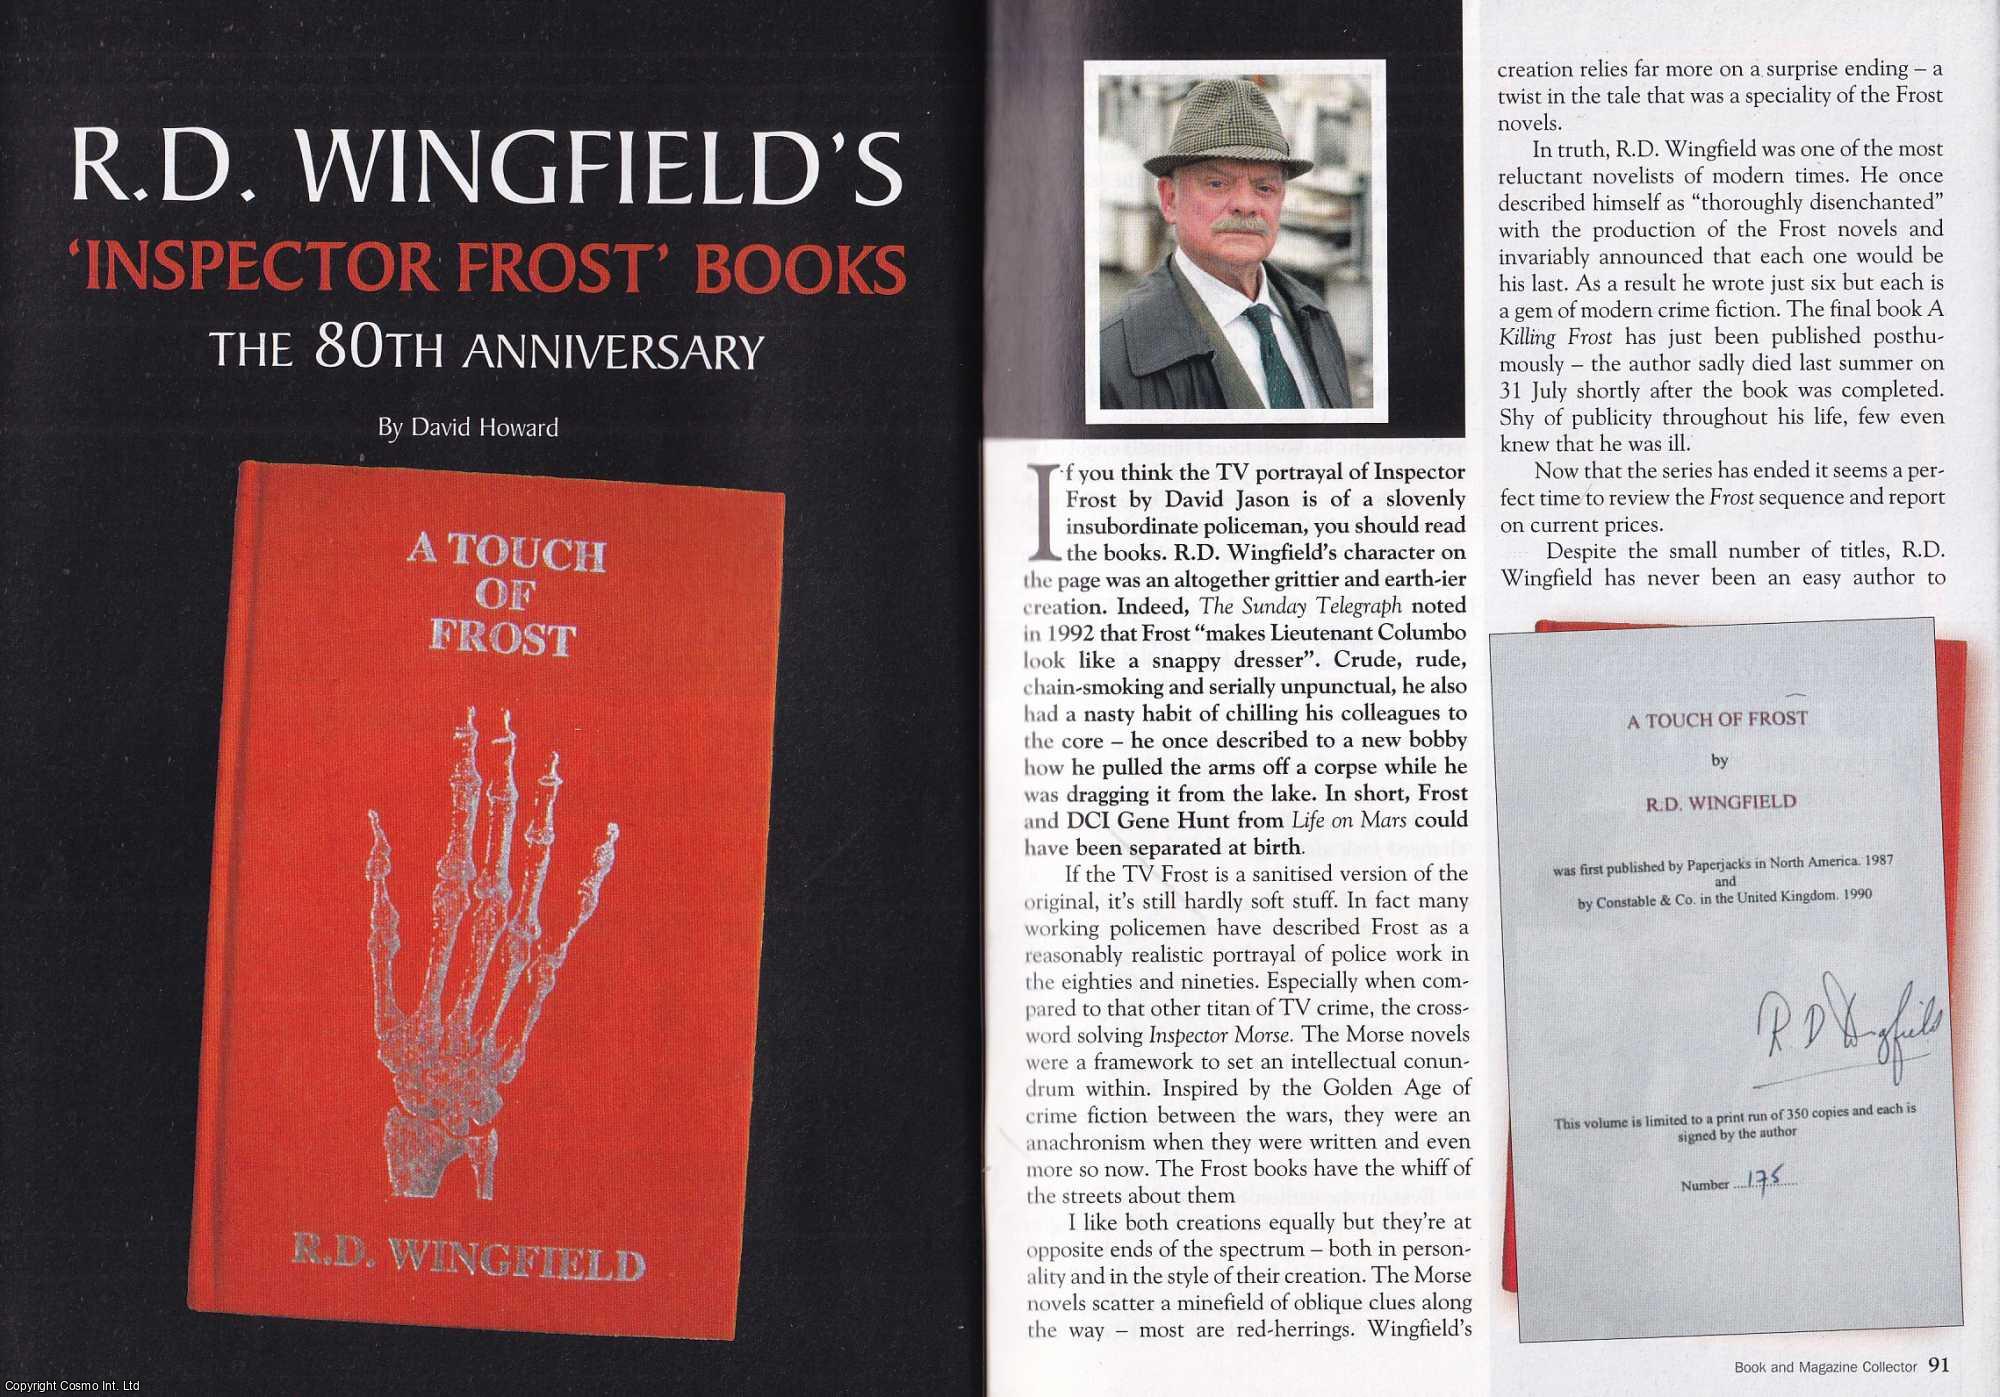 David Howard - R. D. Wingfield's Inspector Frost Books. The 80th Anniversary. This is an original article separated from an issue of The Book & Magazine Collector publication, 2008.